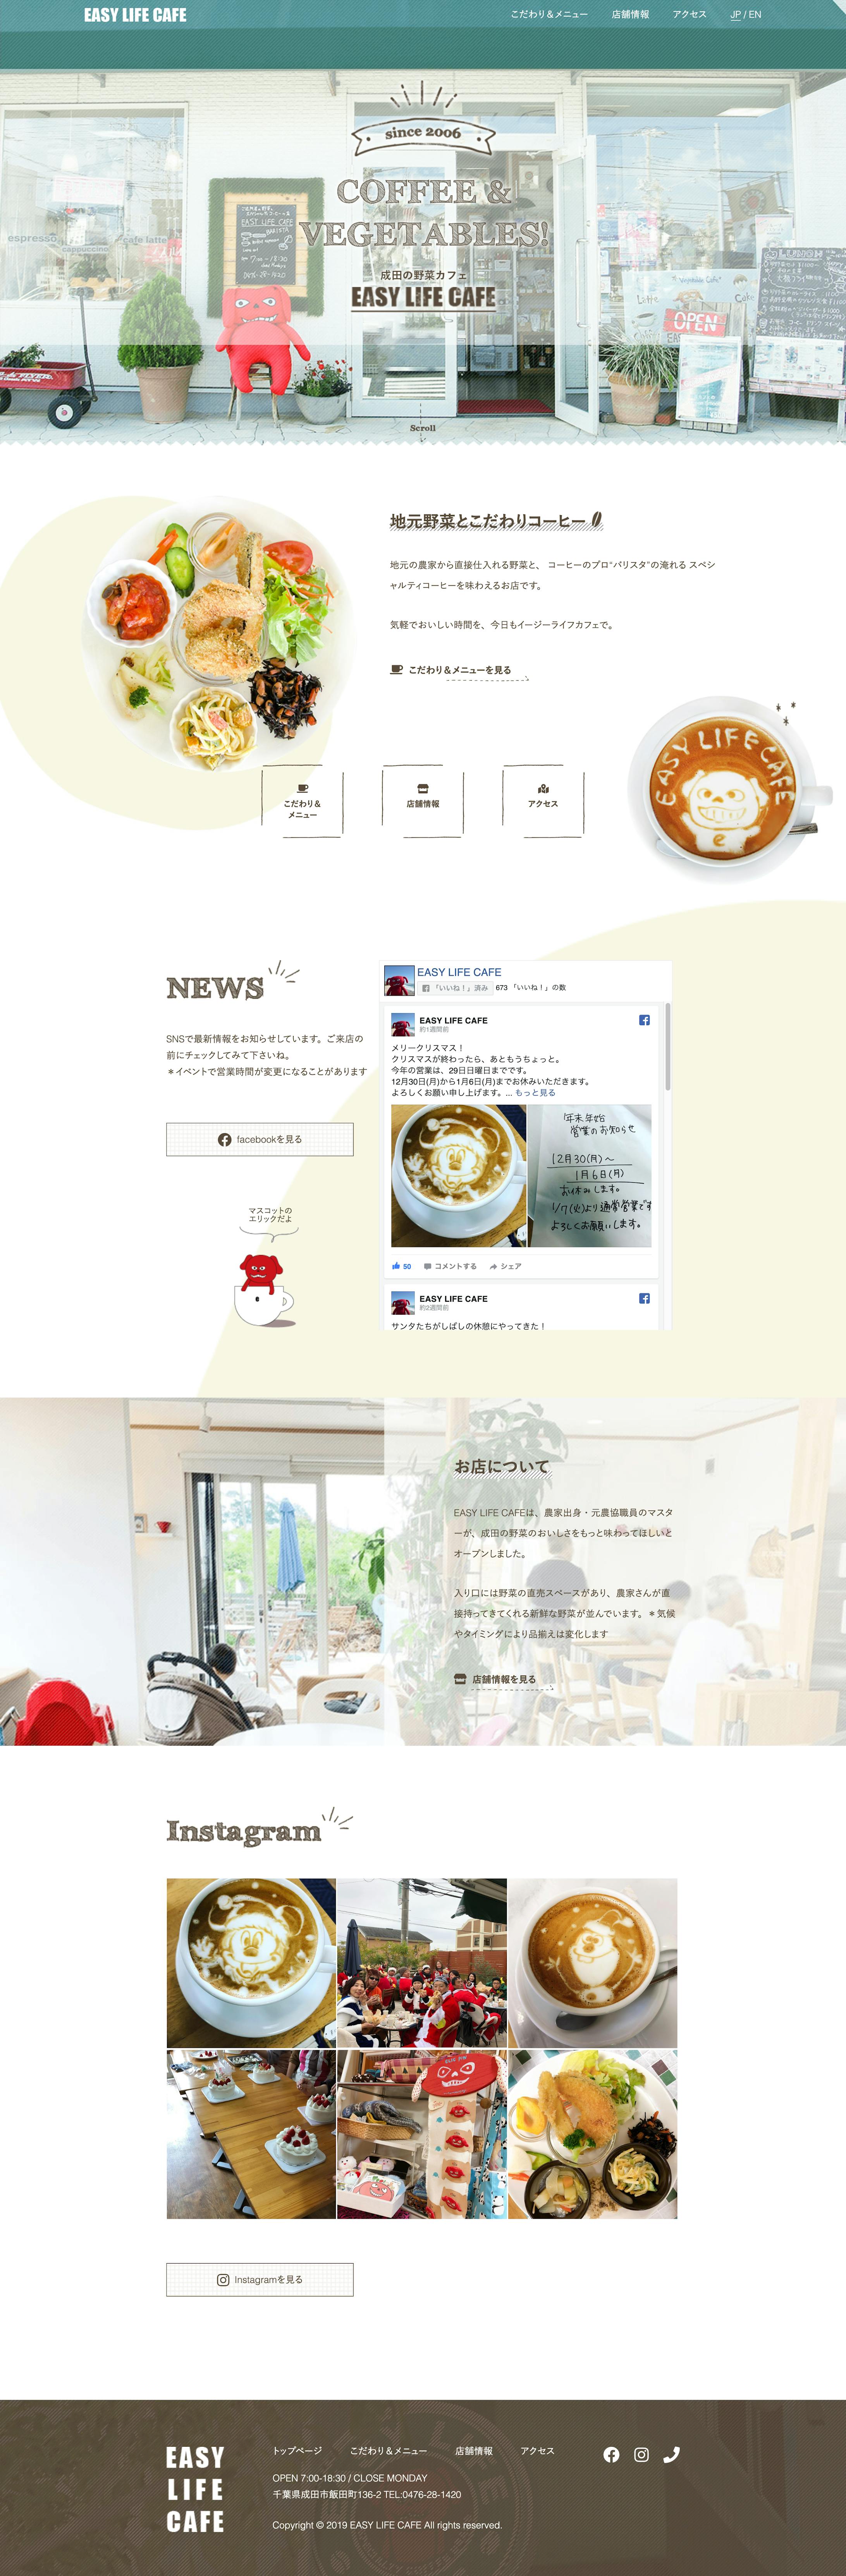 Cafe homepage-2